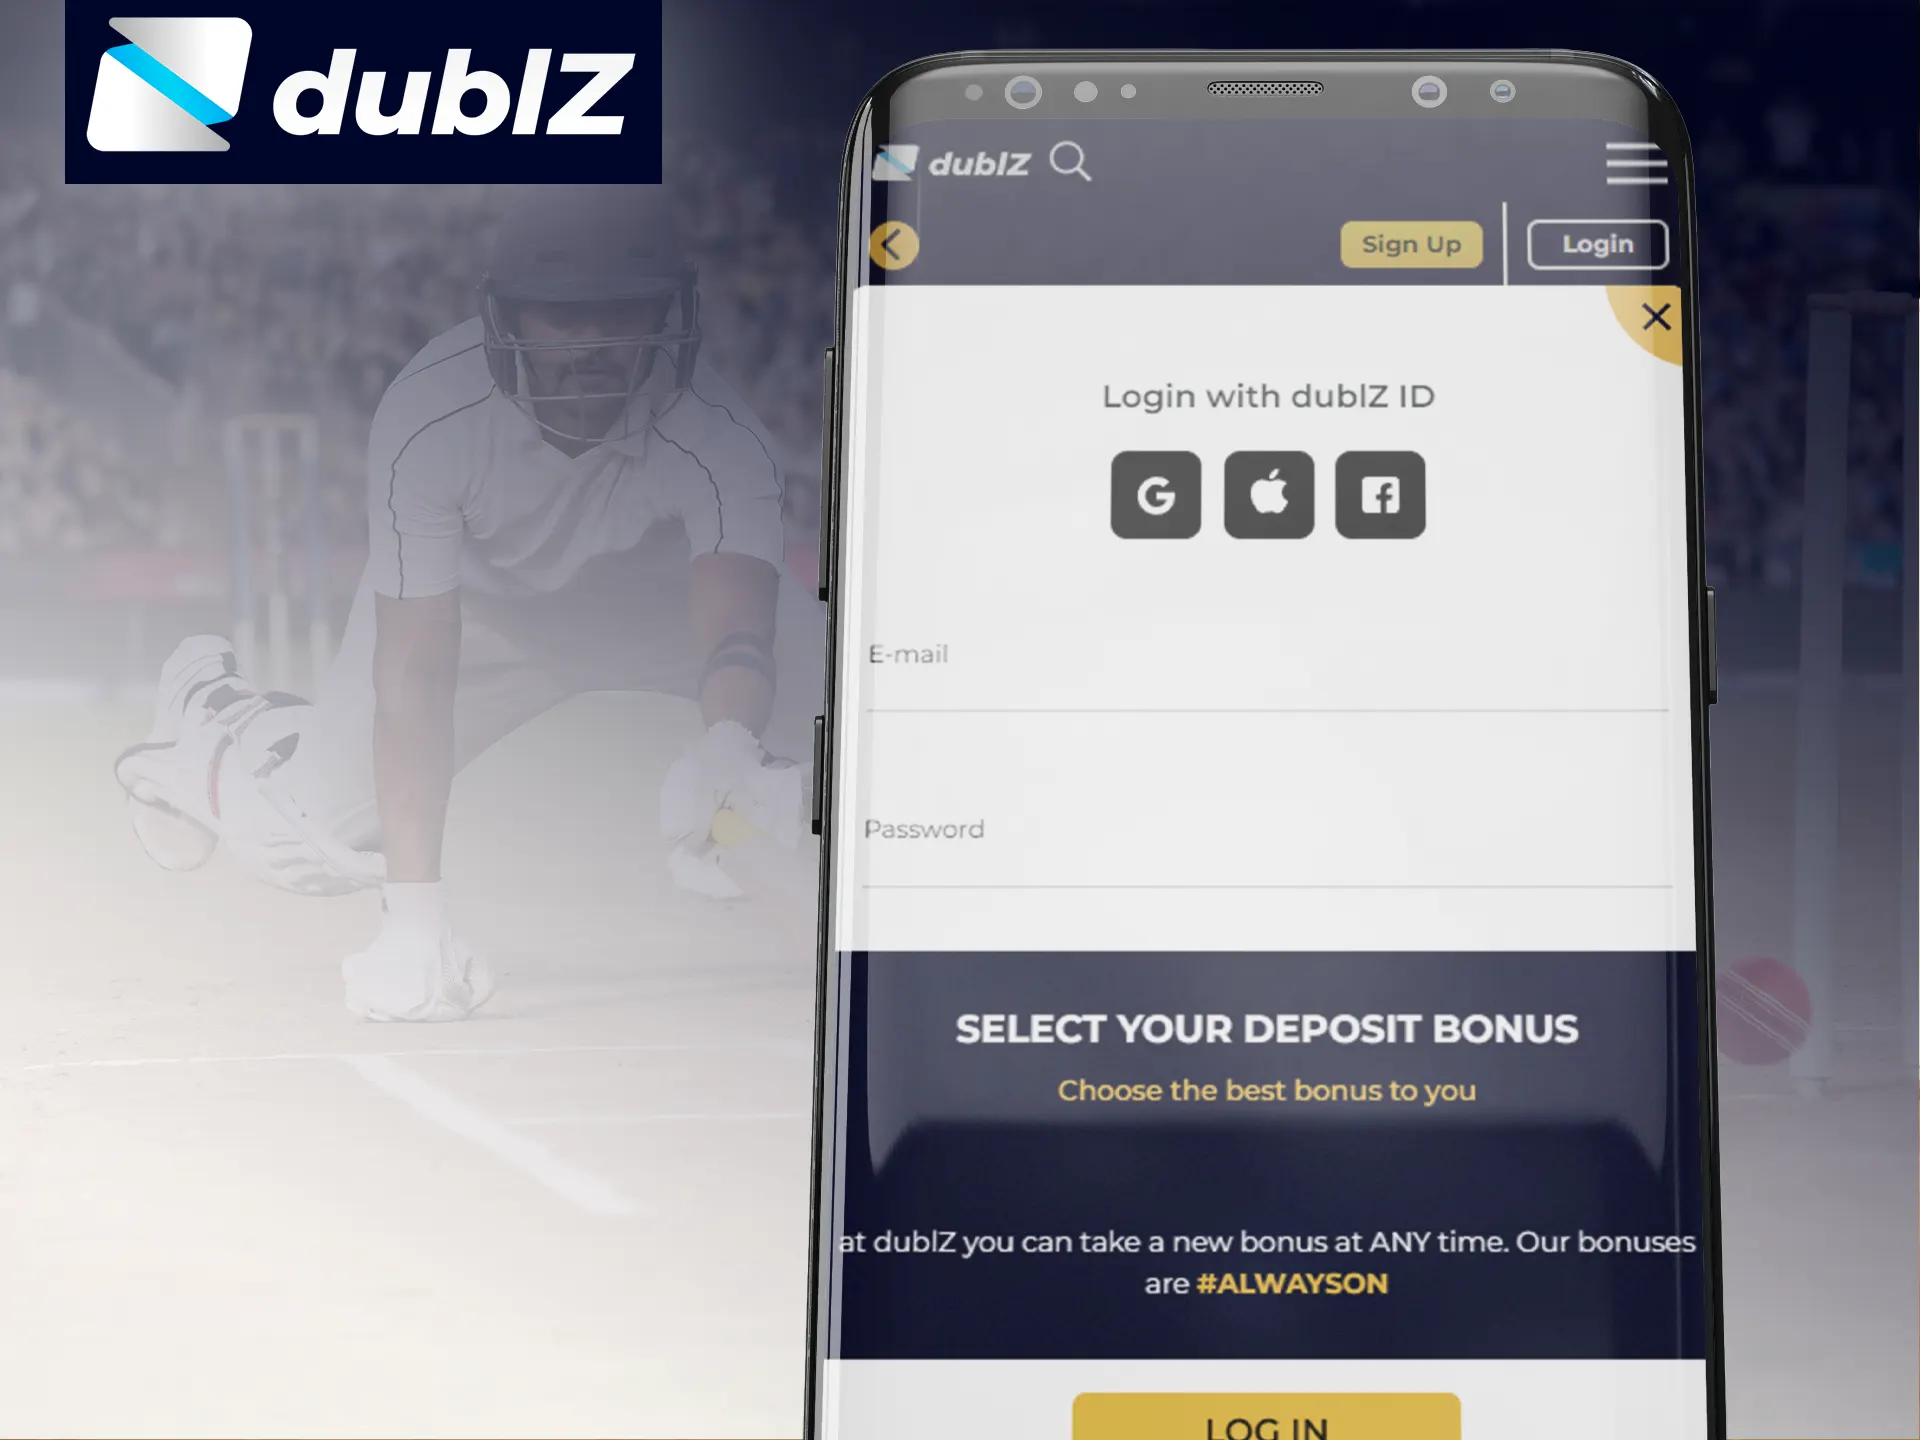 Log in to your Dublz app account.